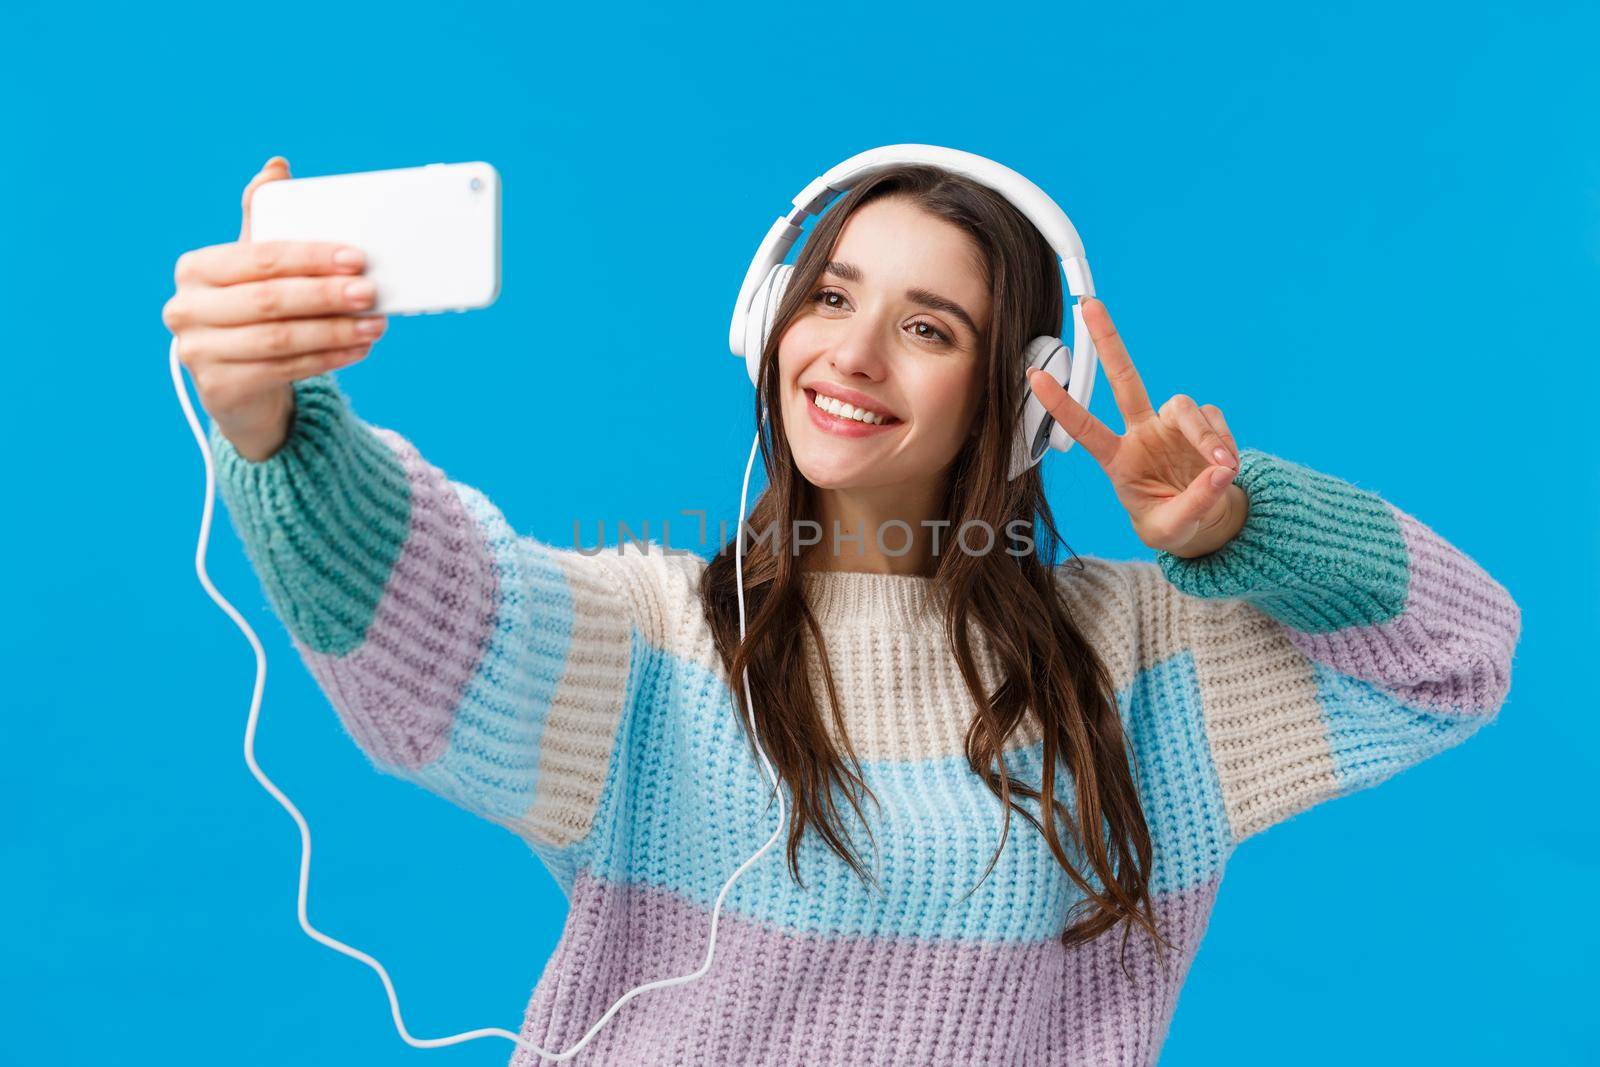 Waist-up portrait cute and tender, lovely charismatic woman taking selfie on smartphone, wearing headphones, listen music, posing with peace gesture as trying-out new app filters for photo.